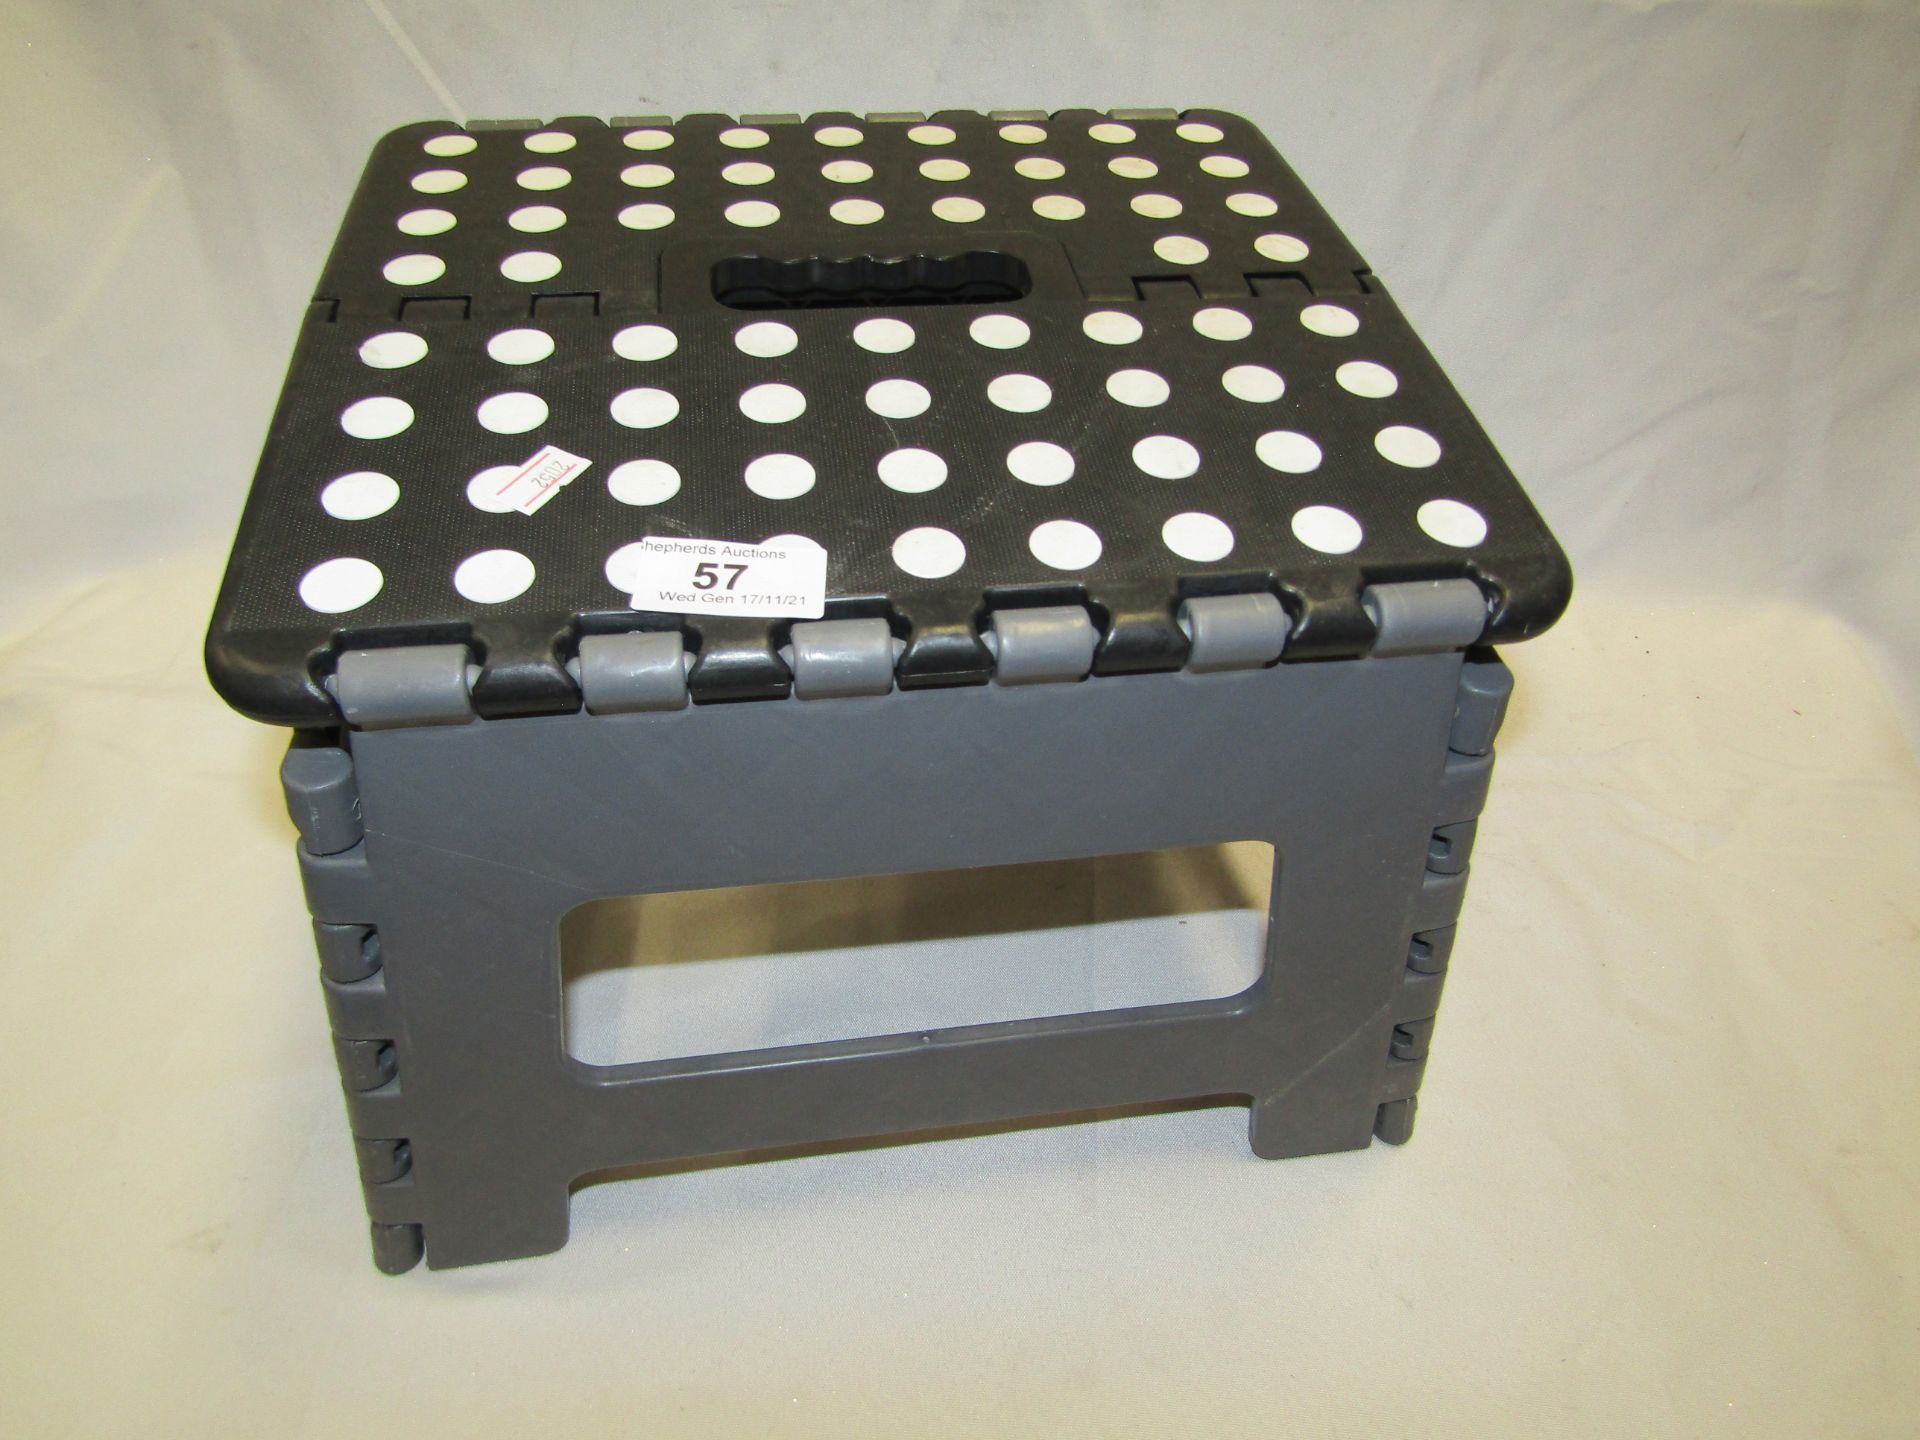 1 x Asab Folding Step Stool packaged new see image for colour